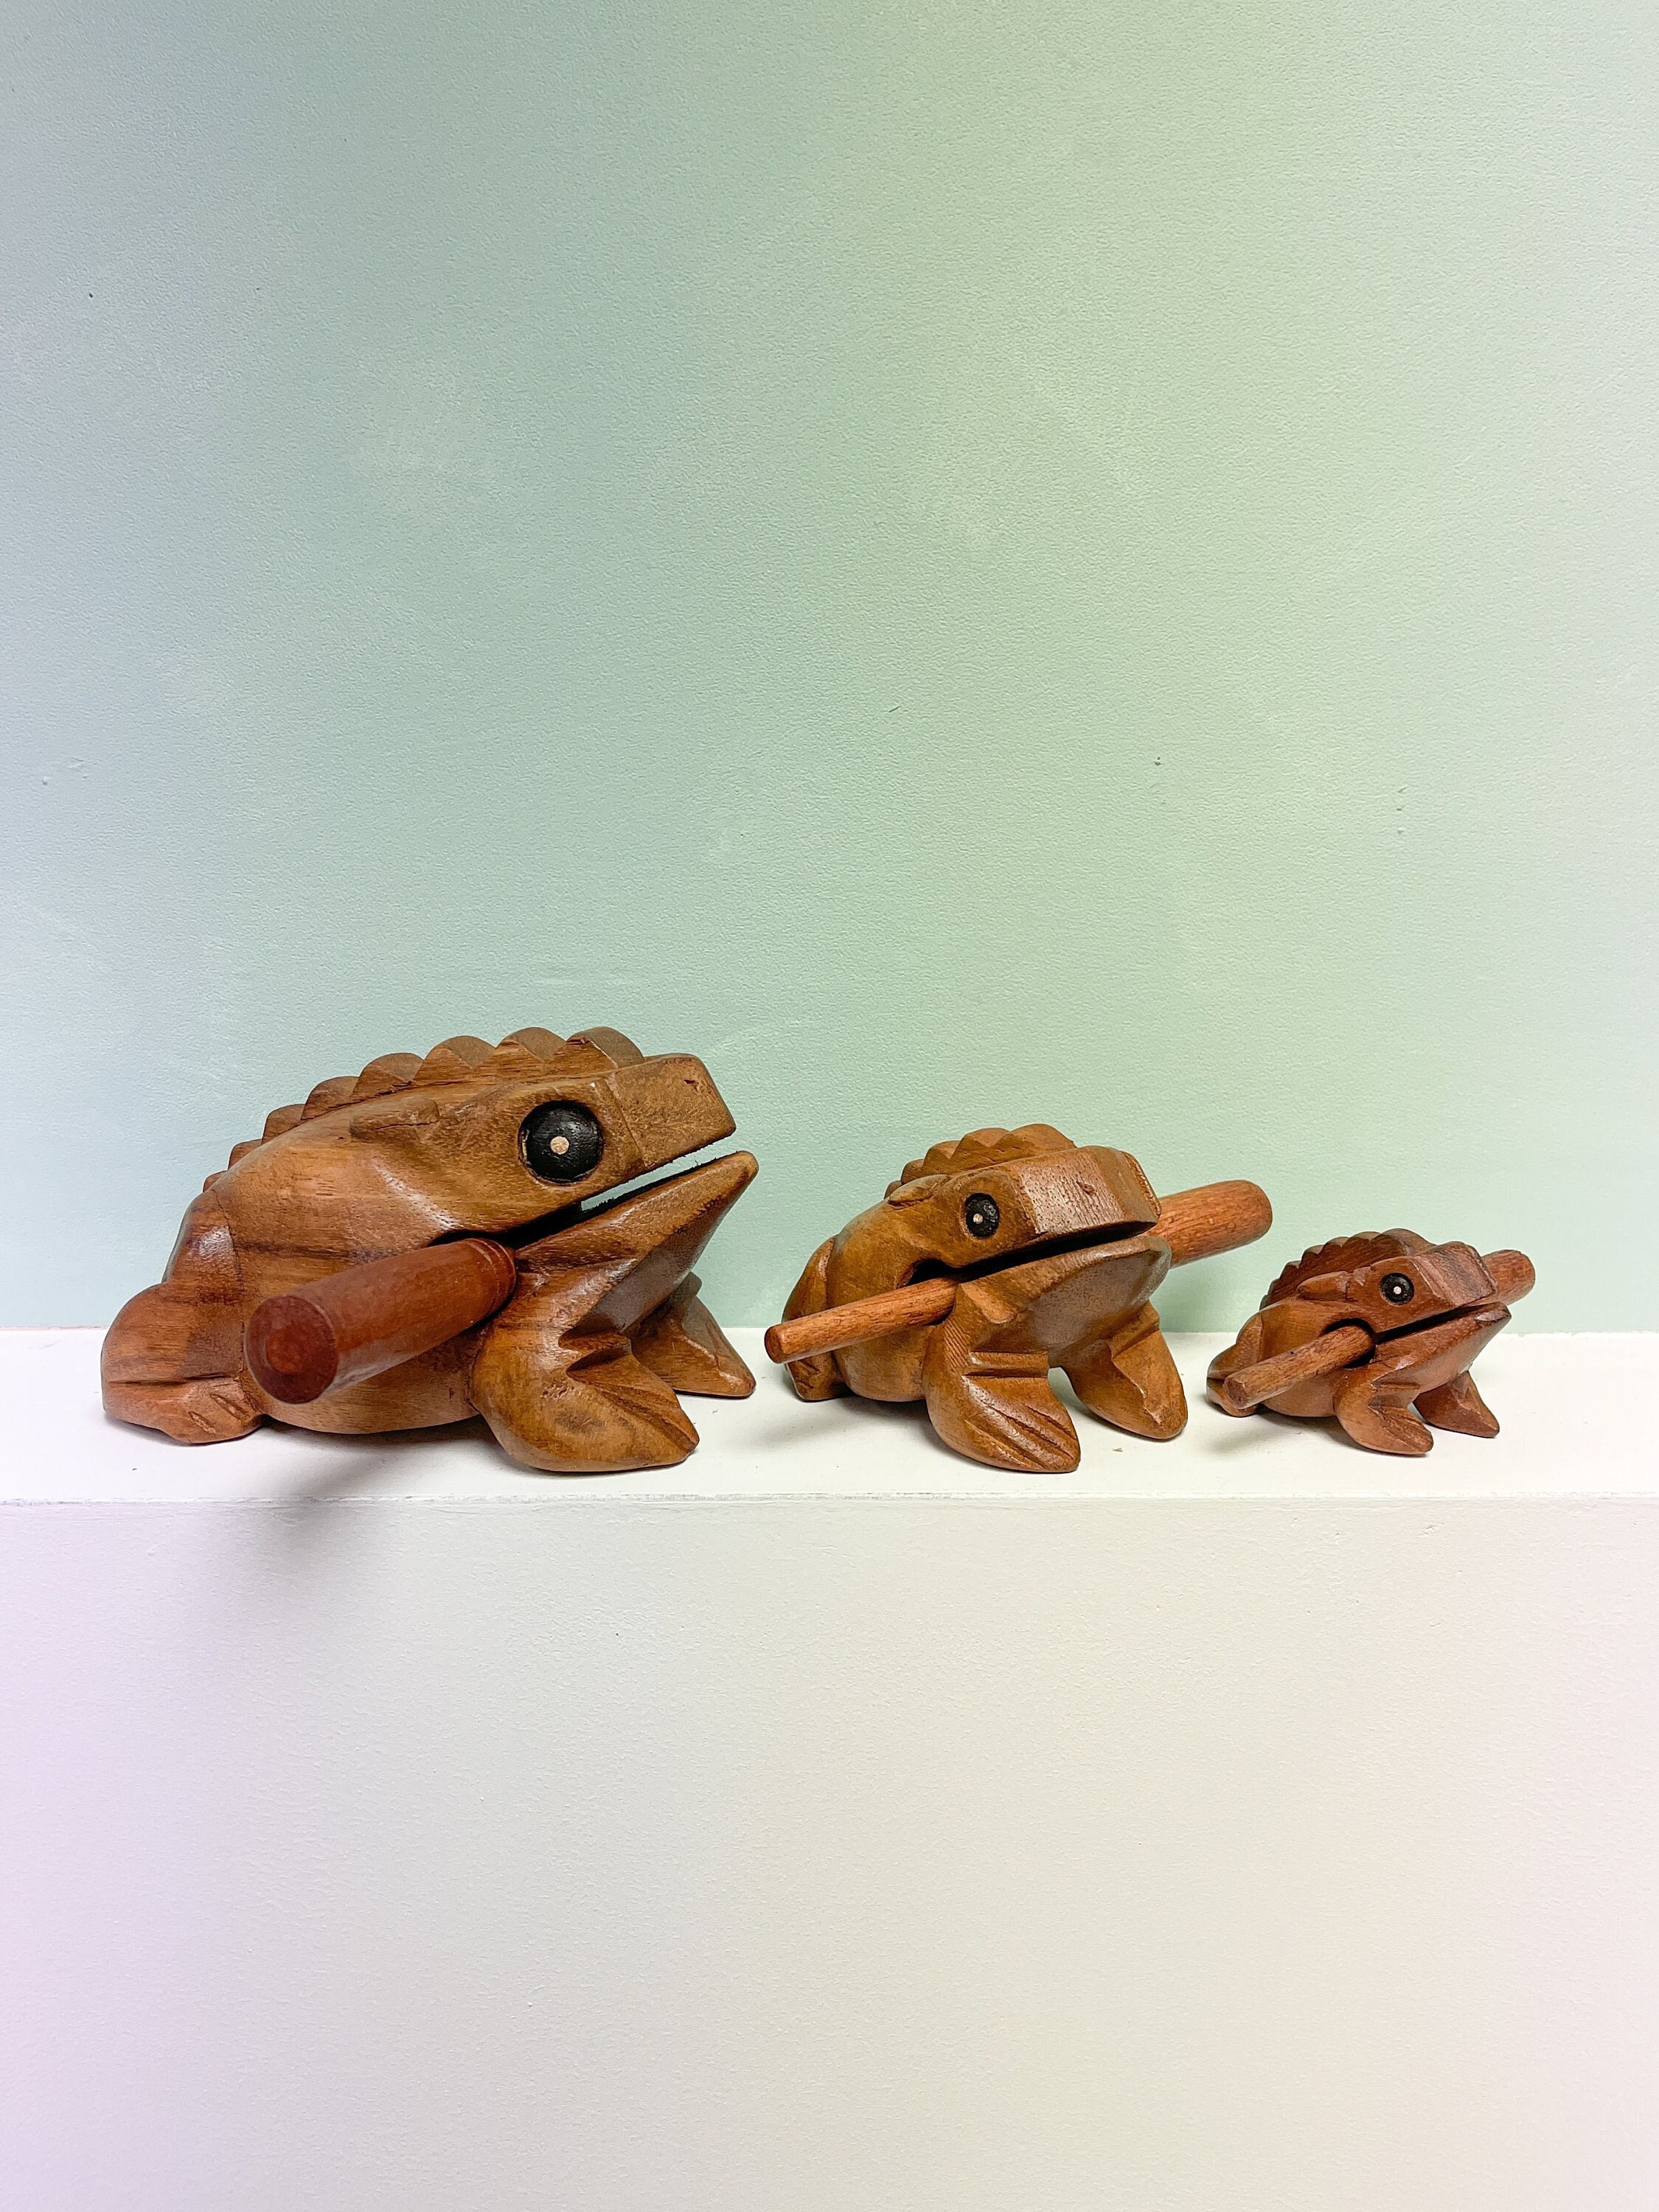 Frog, Toad, This 2 1/2 Original hand carved wooden noise making